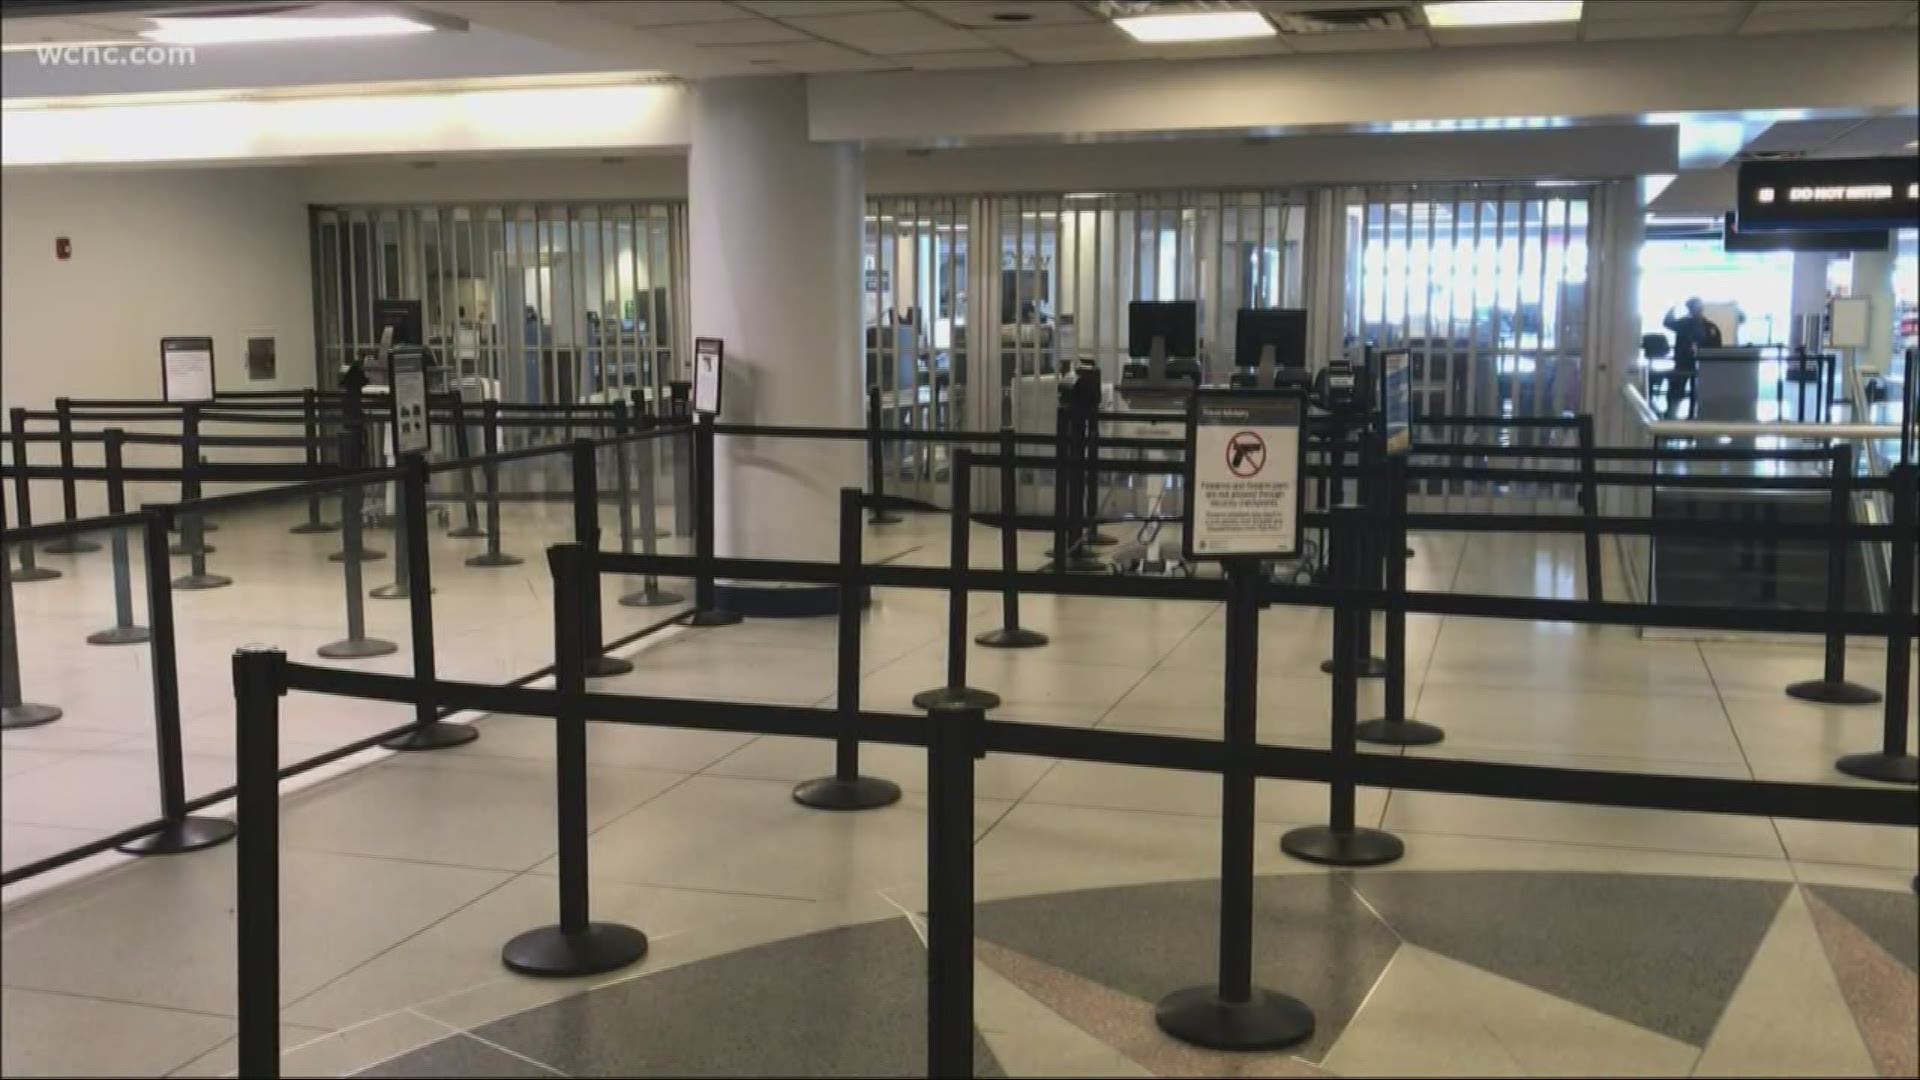 Airports nationwide are looking like ghost towns as travel is considered risky during the COVID-19 pandemic.